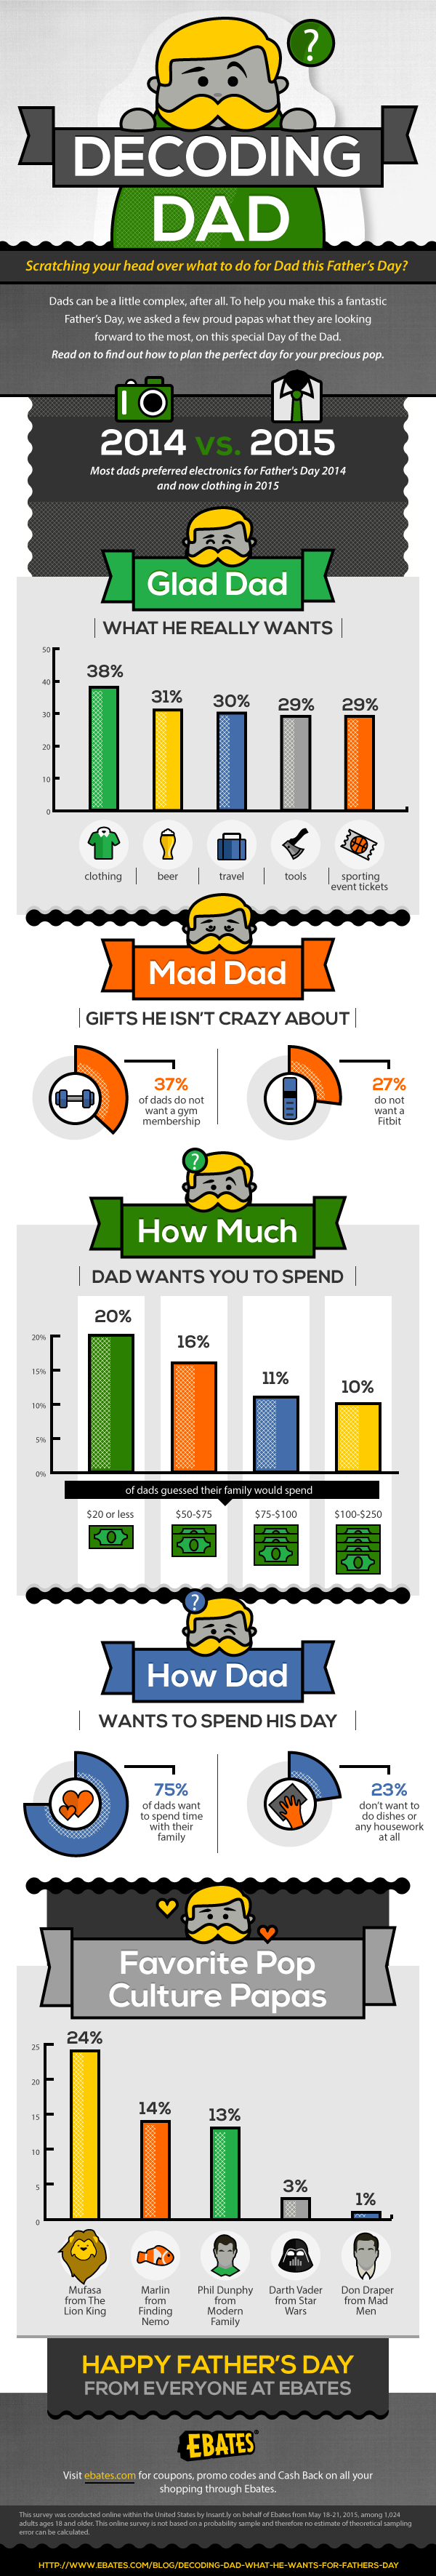 Ebates Fathers Day Decoding Dad IG 3D1 - Decode Your Dad: What to Get him for Father's Day